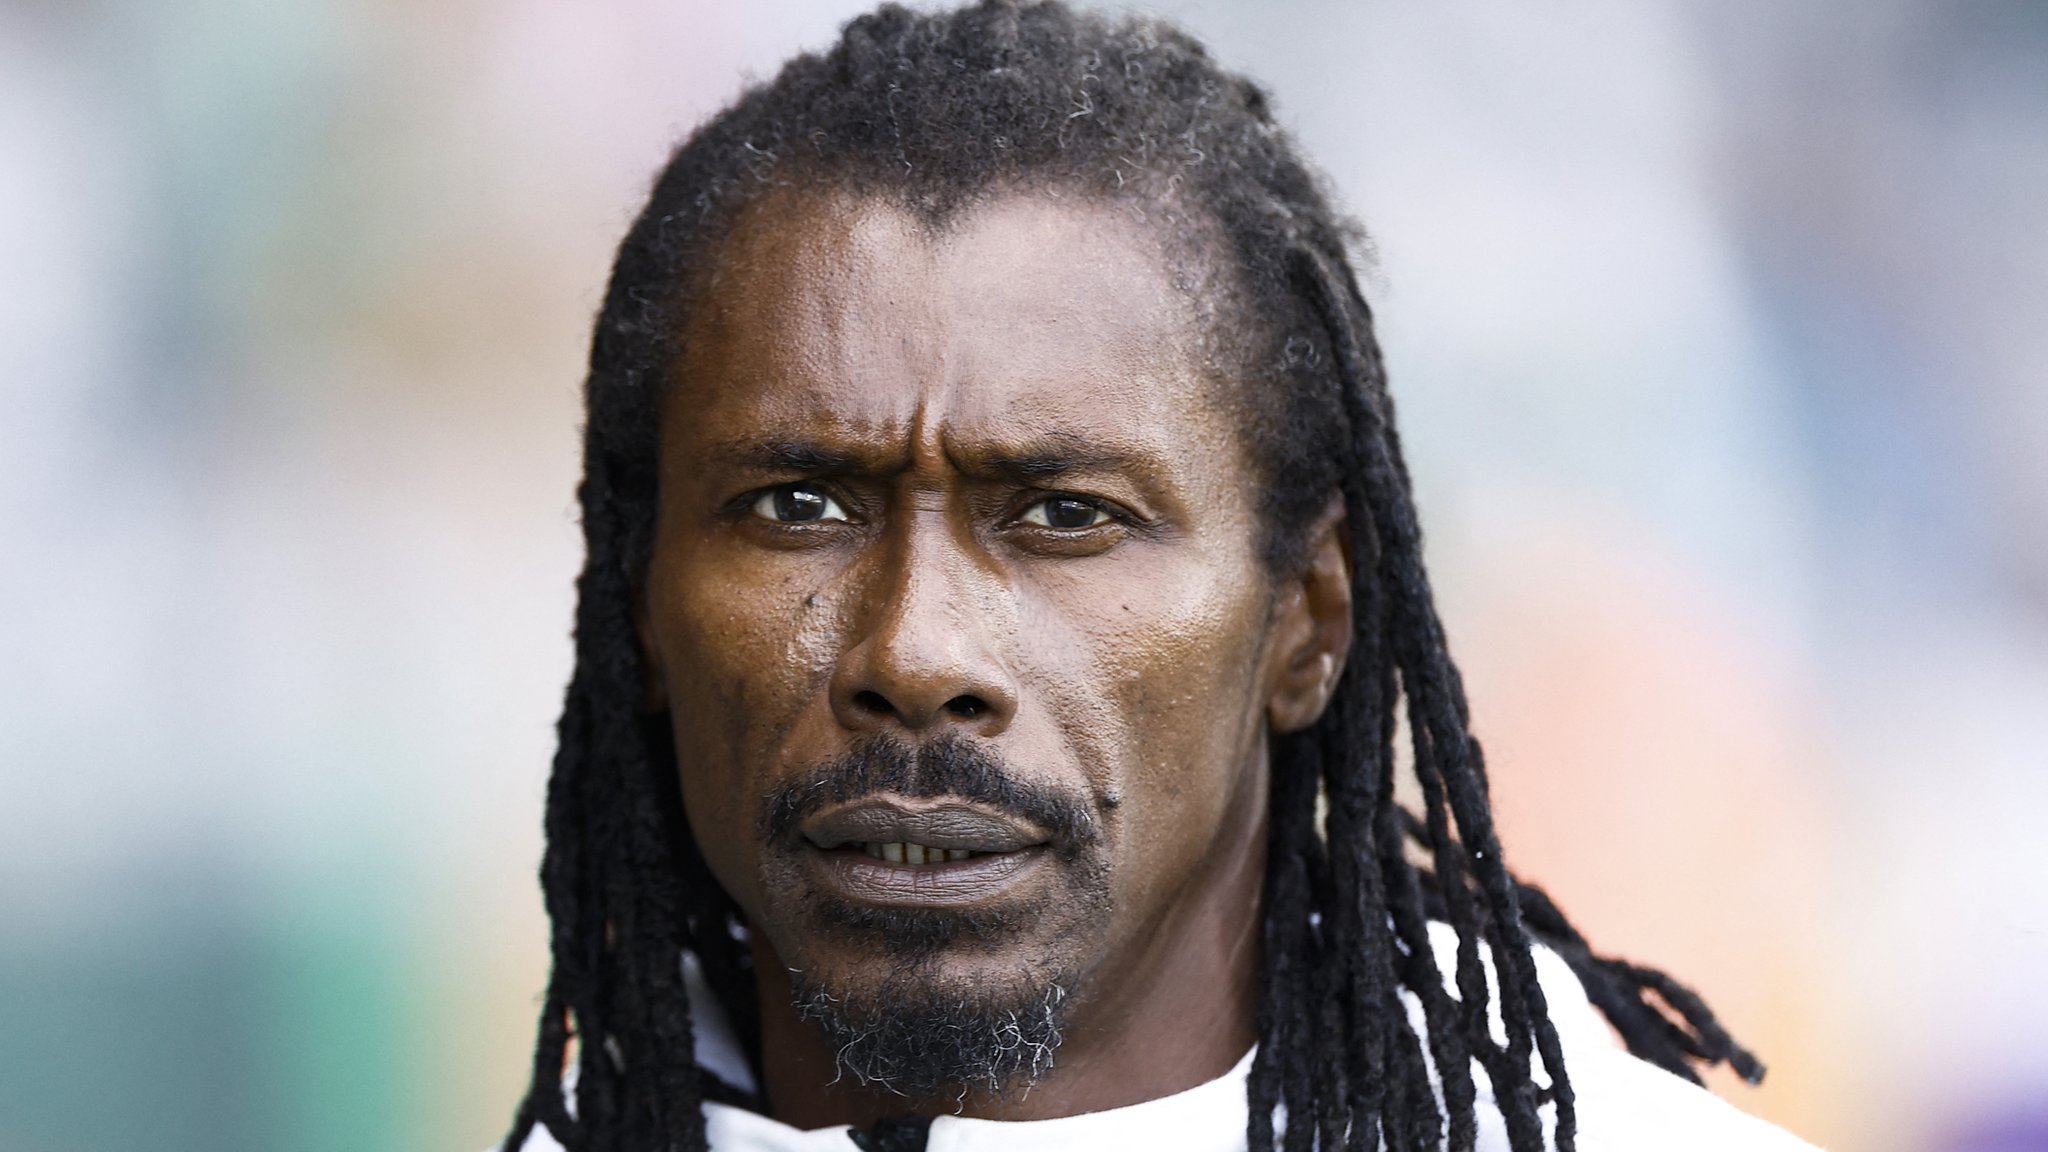 Afcon 2023: Senegal manager Aliou Cisse treated in hospital for